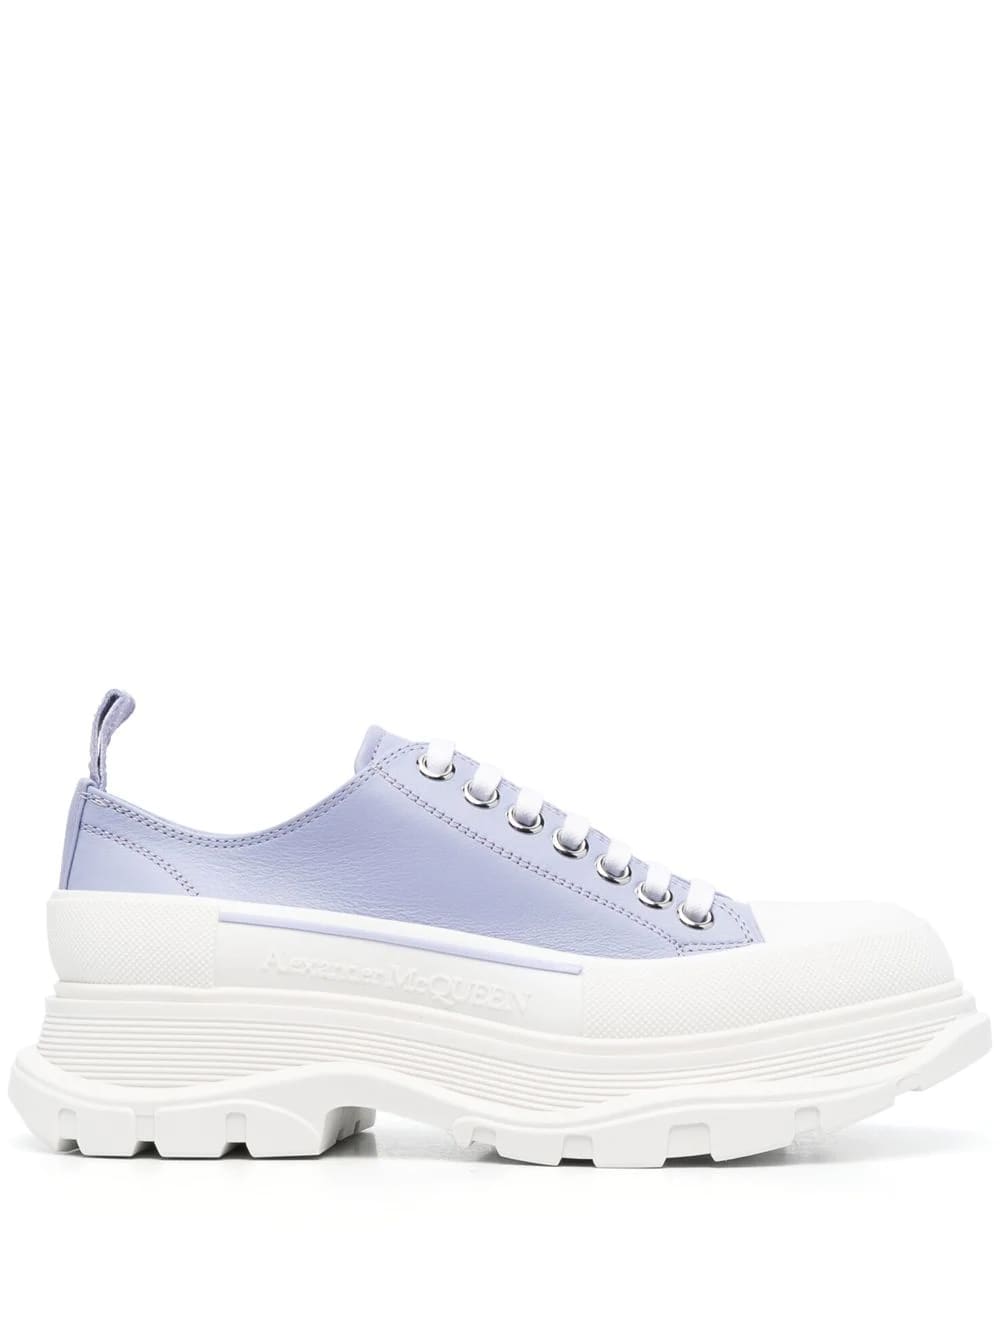 ALEXANDER MCQUEEN LILAC AND WHITE TREAD SLICK LACED SHOES